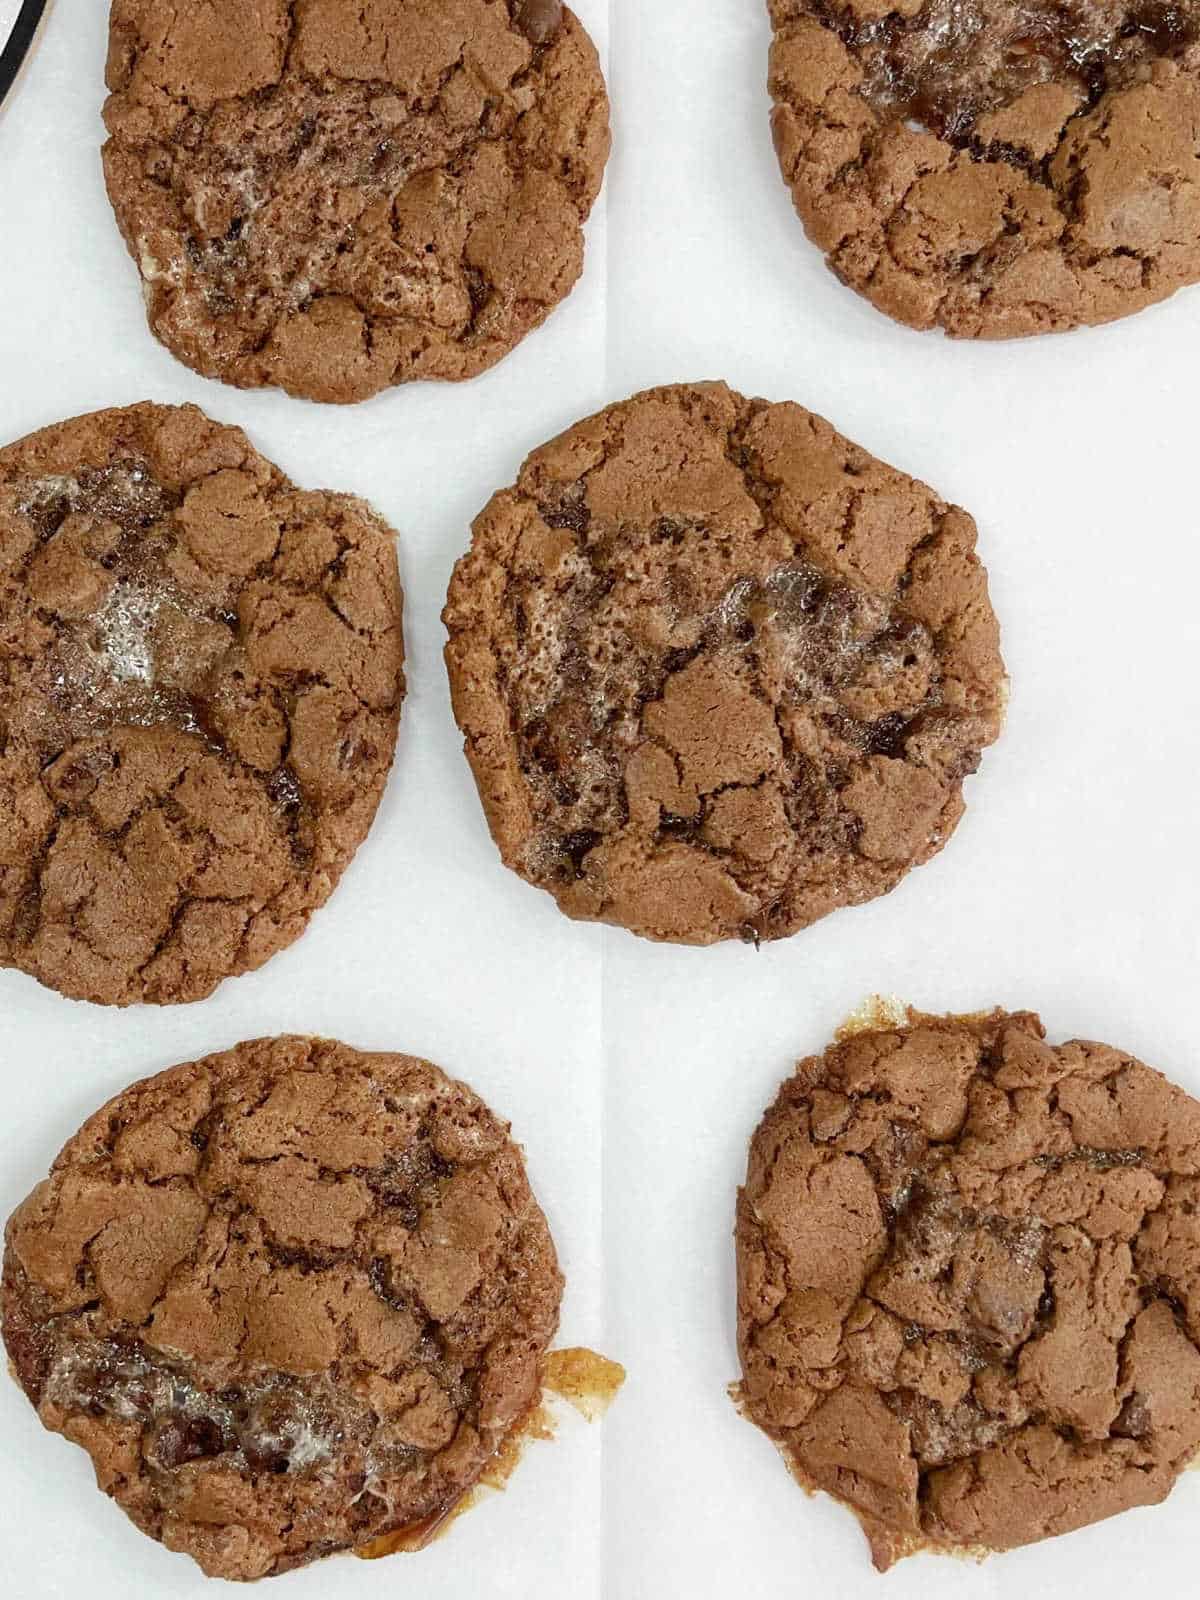 Baked chocolate cookies on a white piece of paper.